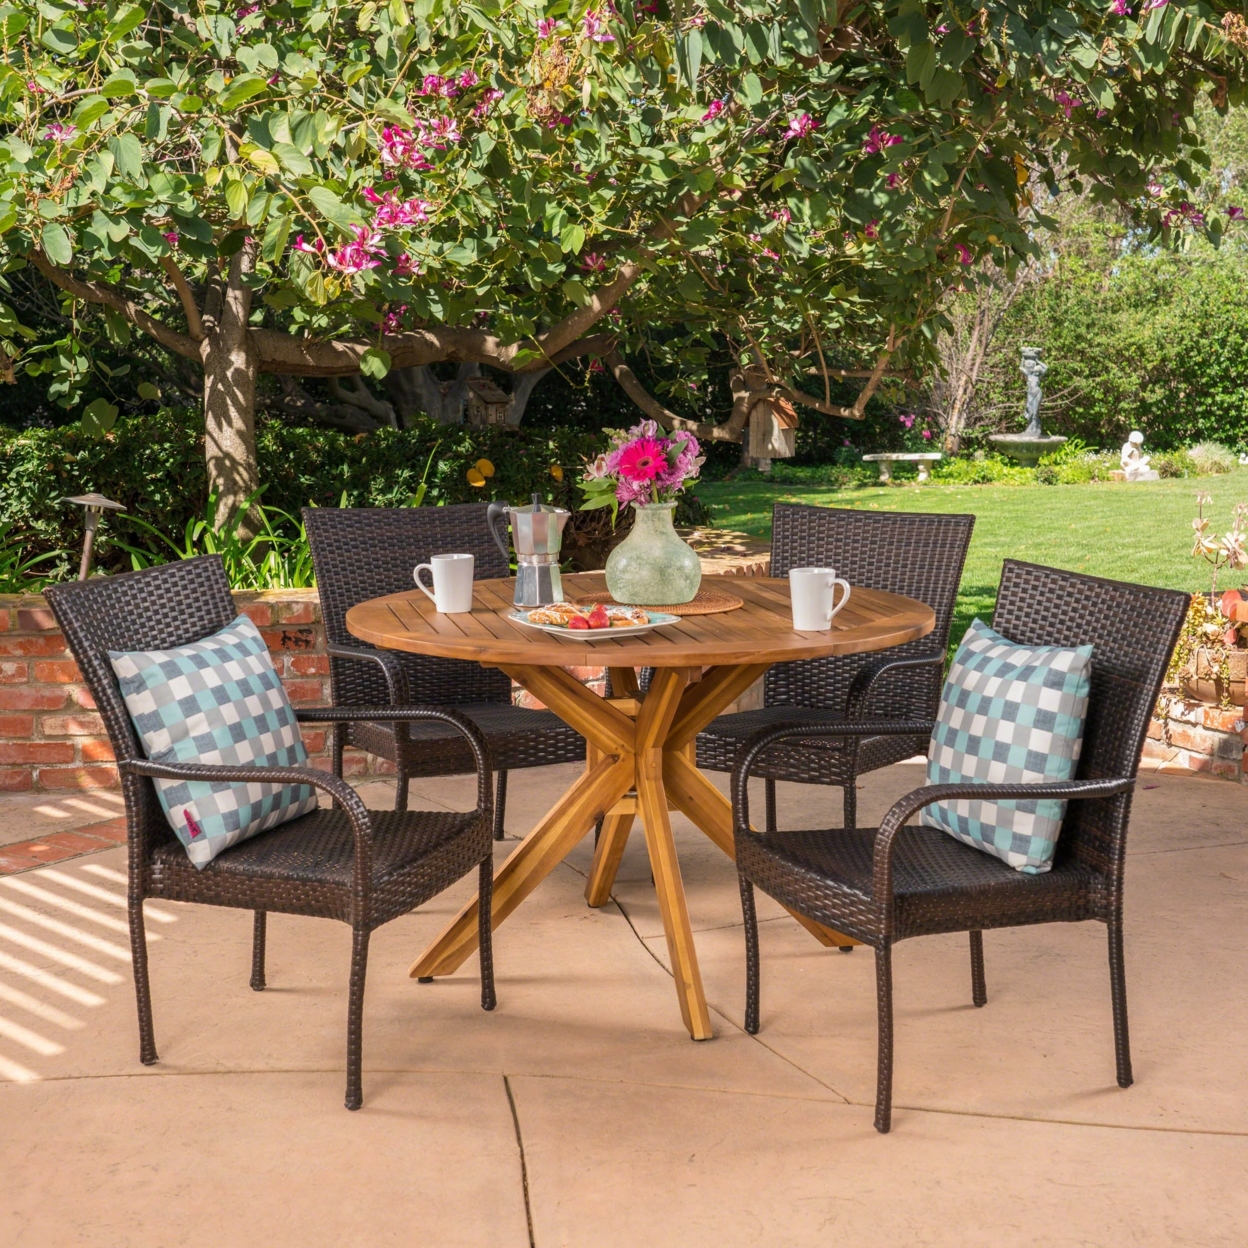 Andrew Outdoor 5 Piece Multibrown Wicker Dining Set With Teak Finish Circular Acacia Wood Dining Table